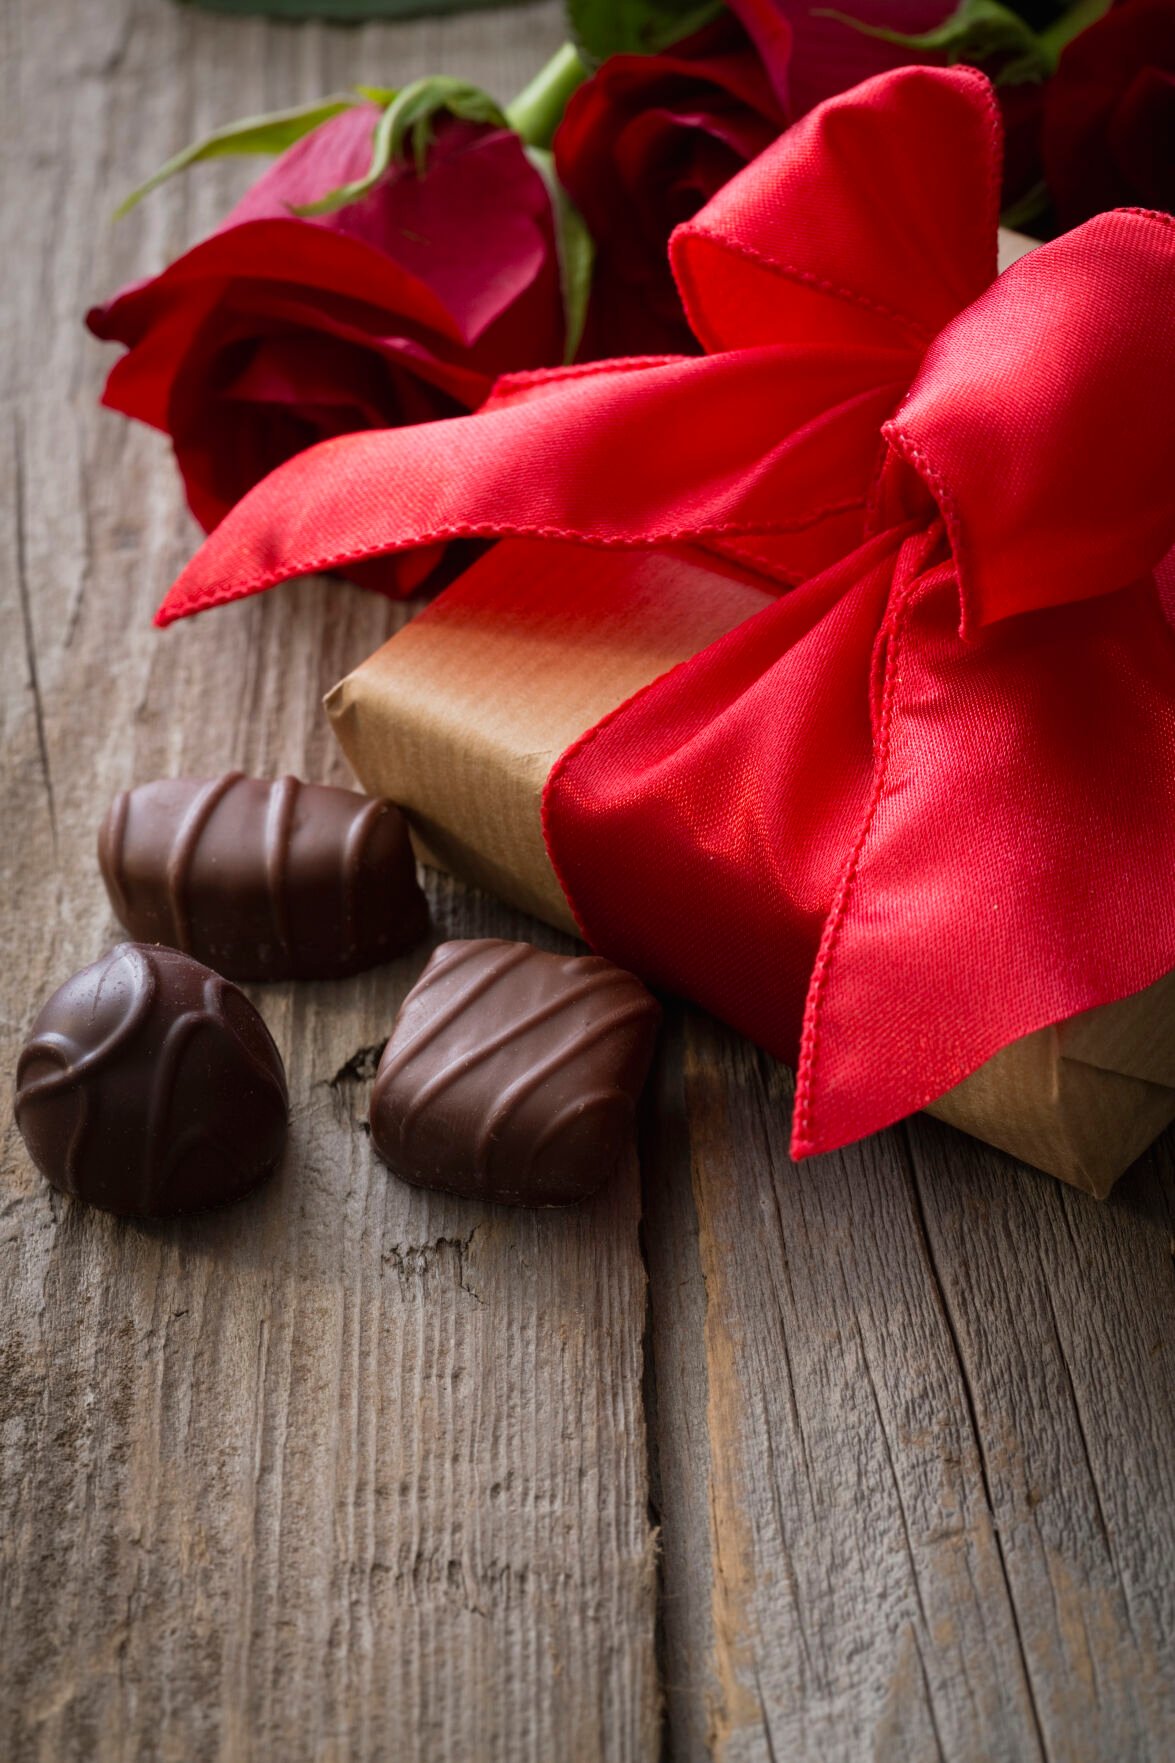 Are Valentine’s Chocolates Healthy or Unhealthy? A Look at the Health and Fitness Aspects | Features